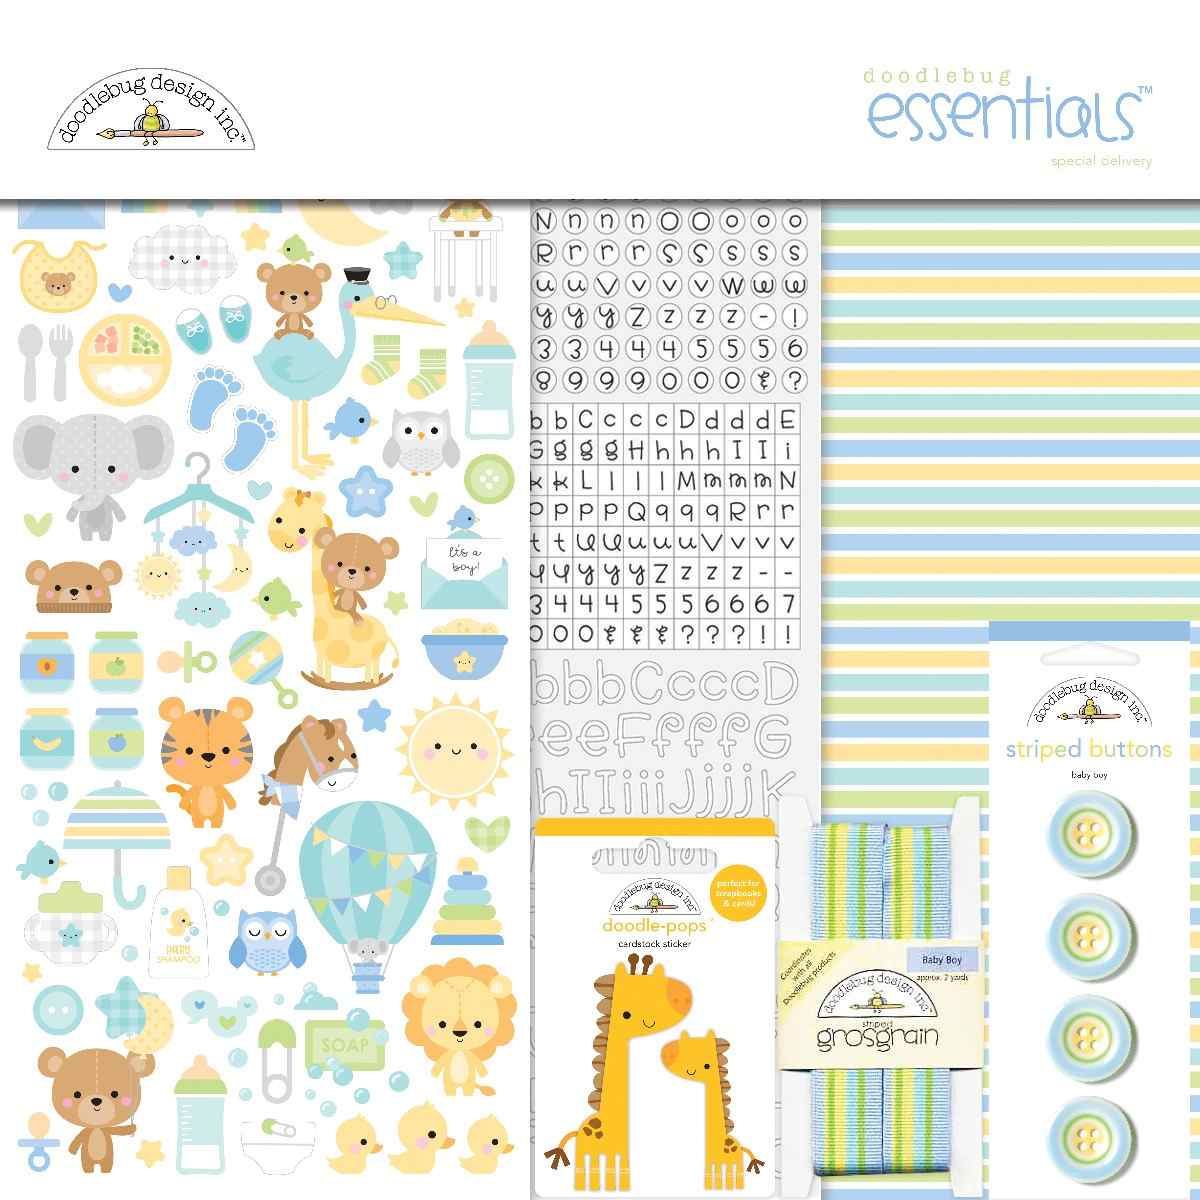 Doodlebug Design - My Happy Place Collection - Essentials Kit